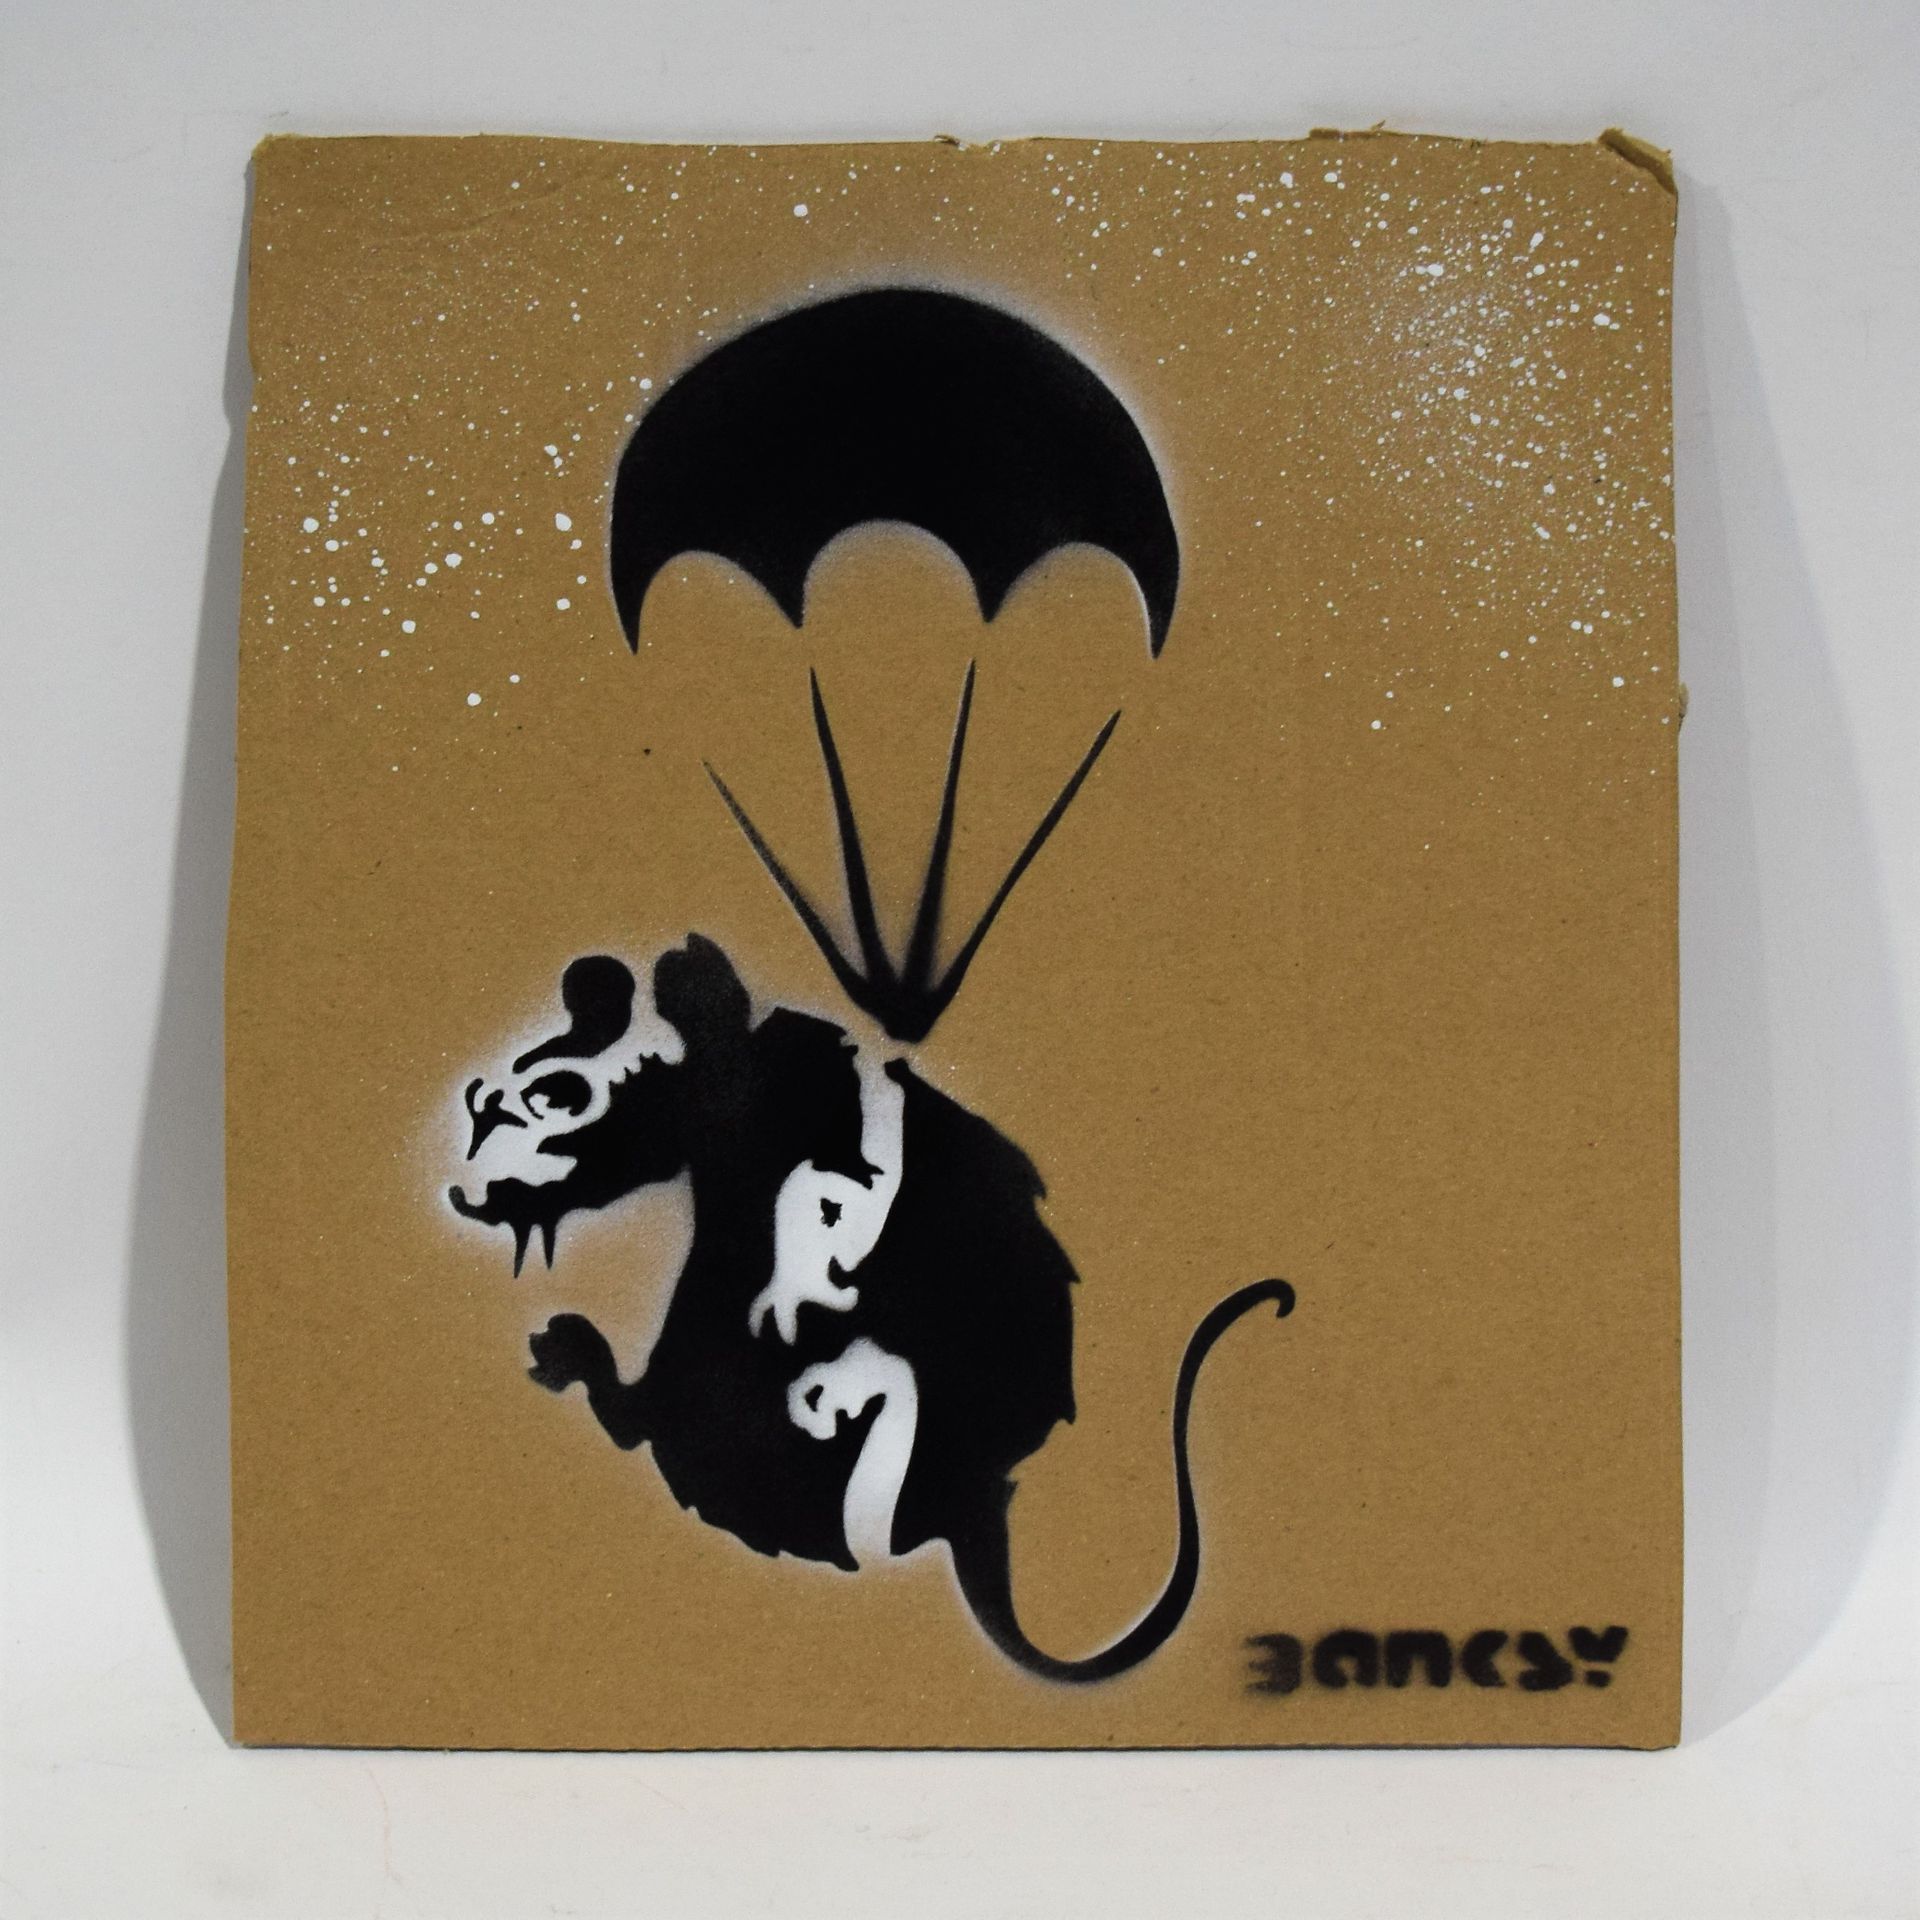 Null BANKSY (after), Dismal Canvas, 2015, Stencil on cardboard, Souvenir object &hellip;